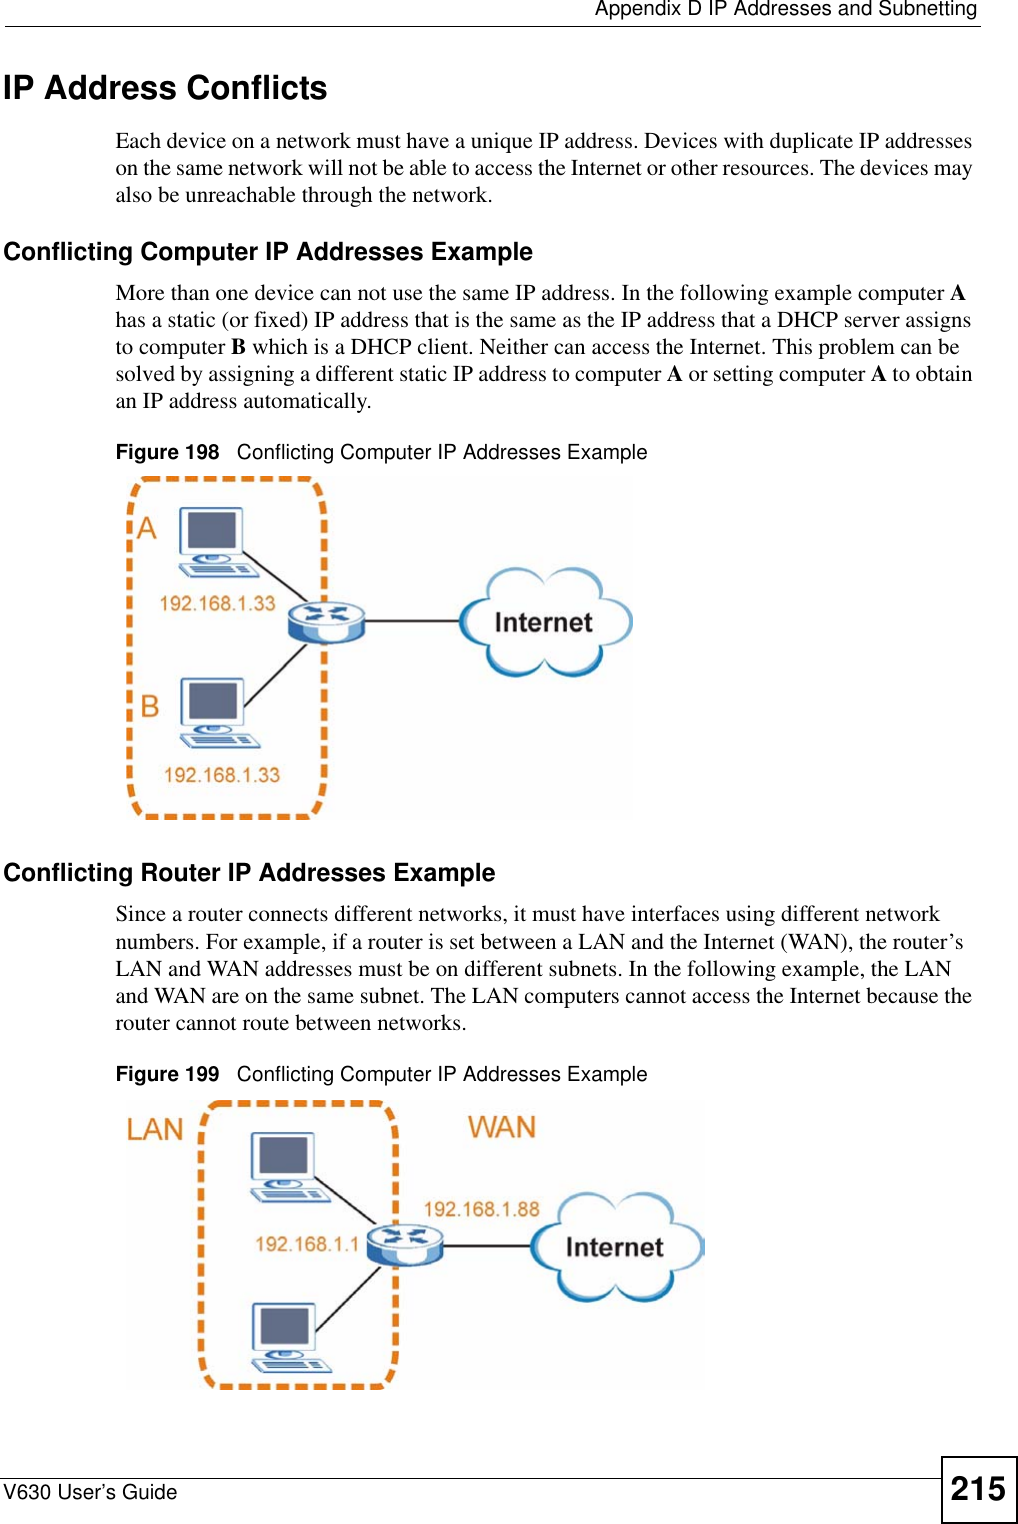  Appendix D IP Addresses and SubnettingV630 User’s Guide 215IP Address ConflictsEach device on a network must have a unique IP address. Devices with duplicate IP addresses on the same network will not be able to access the Internet or other resources. The devices may also be unreachable through the network. Conflicting Computer IP Addresses ExampleMore than one device can not use the same IP address. In the following example computer A has a static (or fixed) IP address that is the same as the IP address that a DHCP server assigns to computer B which is a DHCP client. Neither can access the Internet. This problem can be solved by assigning a different static IP address to computer A or setting computer A to obtain an IP address automatically.  Figure 198   Conflicting Computer IP Addresses ExampleConflicting Router IP Addresses ExampleSince a router connects different networks, it must have interfaces using different network numbers. For example, if a router is set between a LAN and the Internet (WAN), the router’s LAN and WAN addresses must be on different subnets. In the following example, the LAN and WAN are on the same subnet. The LAN computers cannot access the Internet because the router cannot route between networks.Figure 199   Conflicting Computer IP Addresses Example